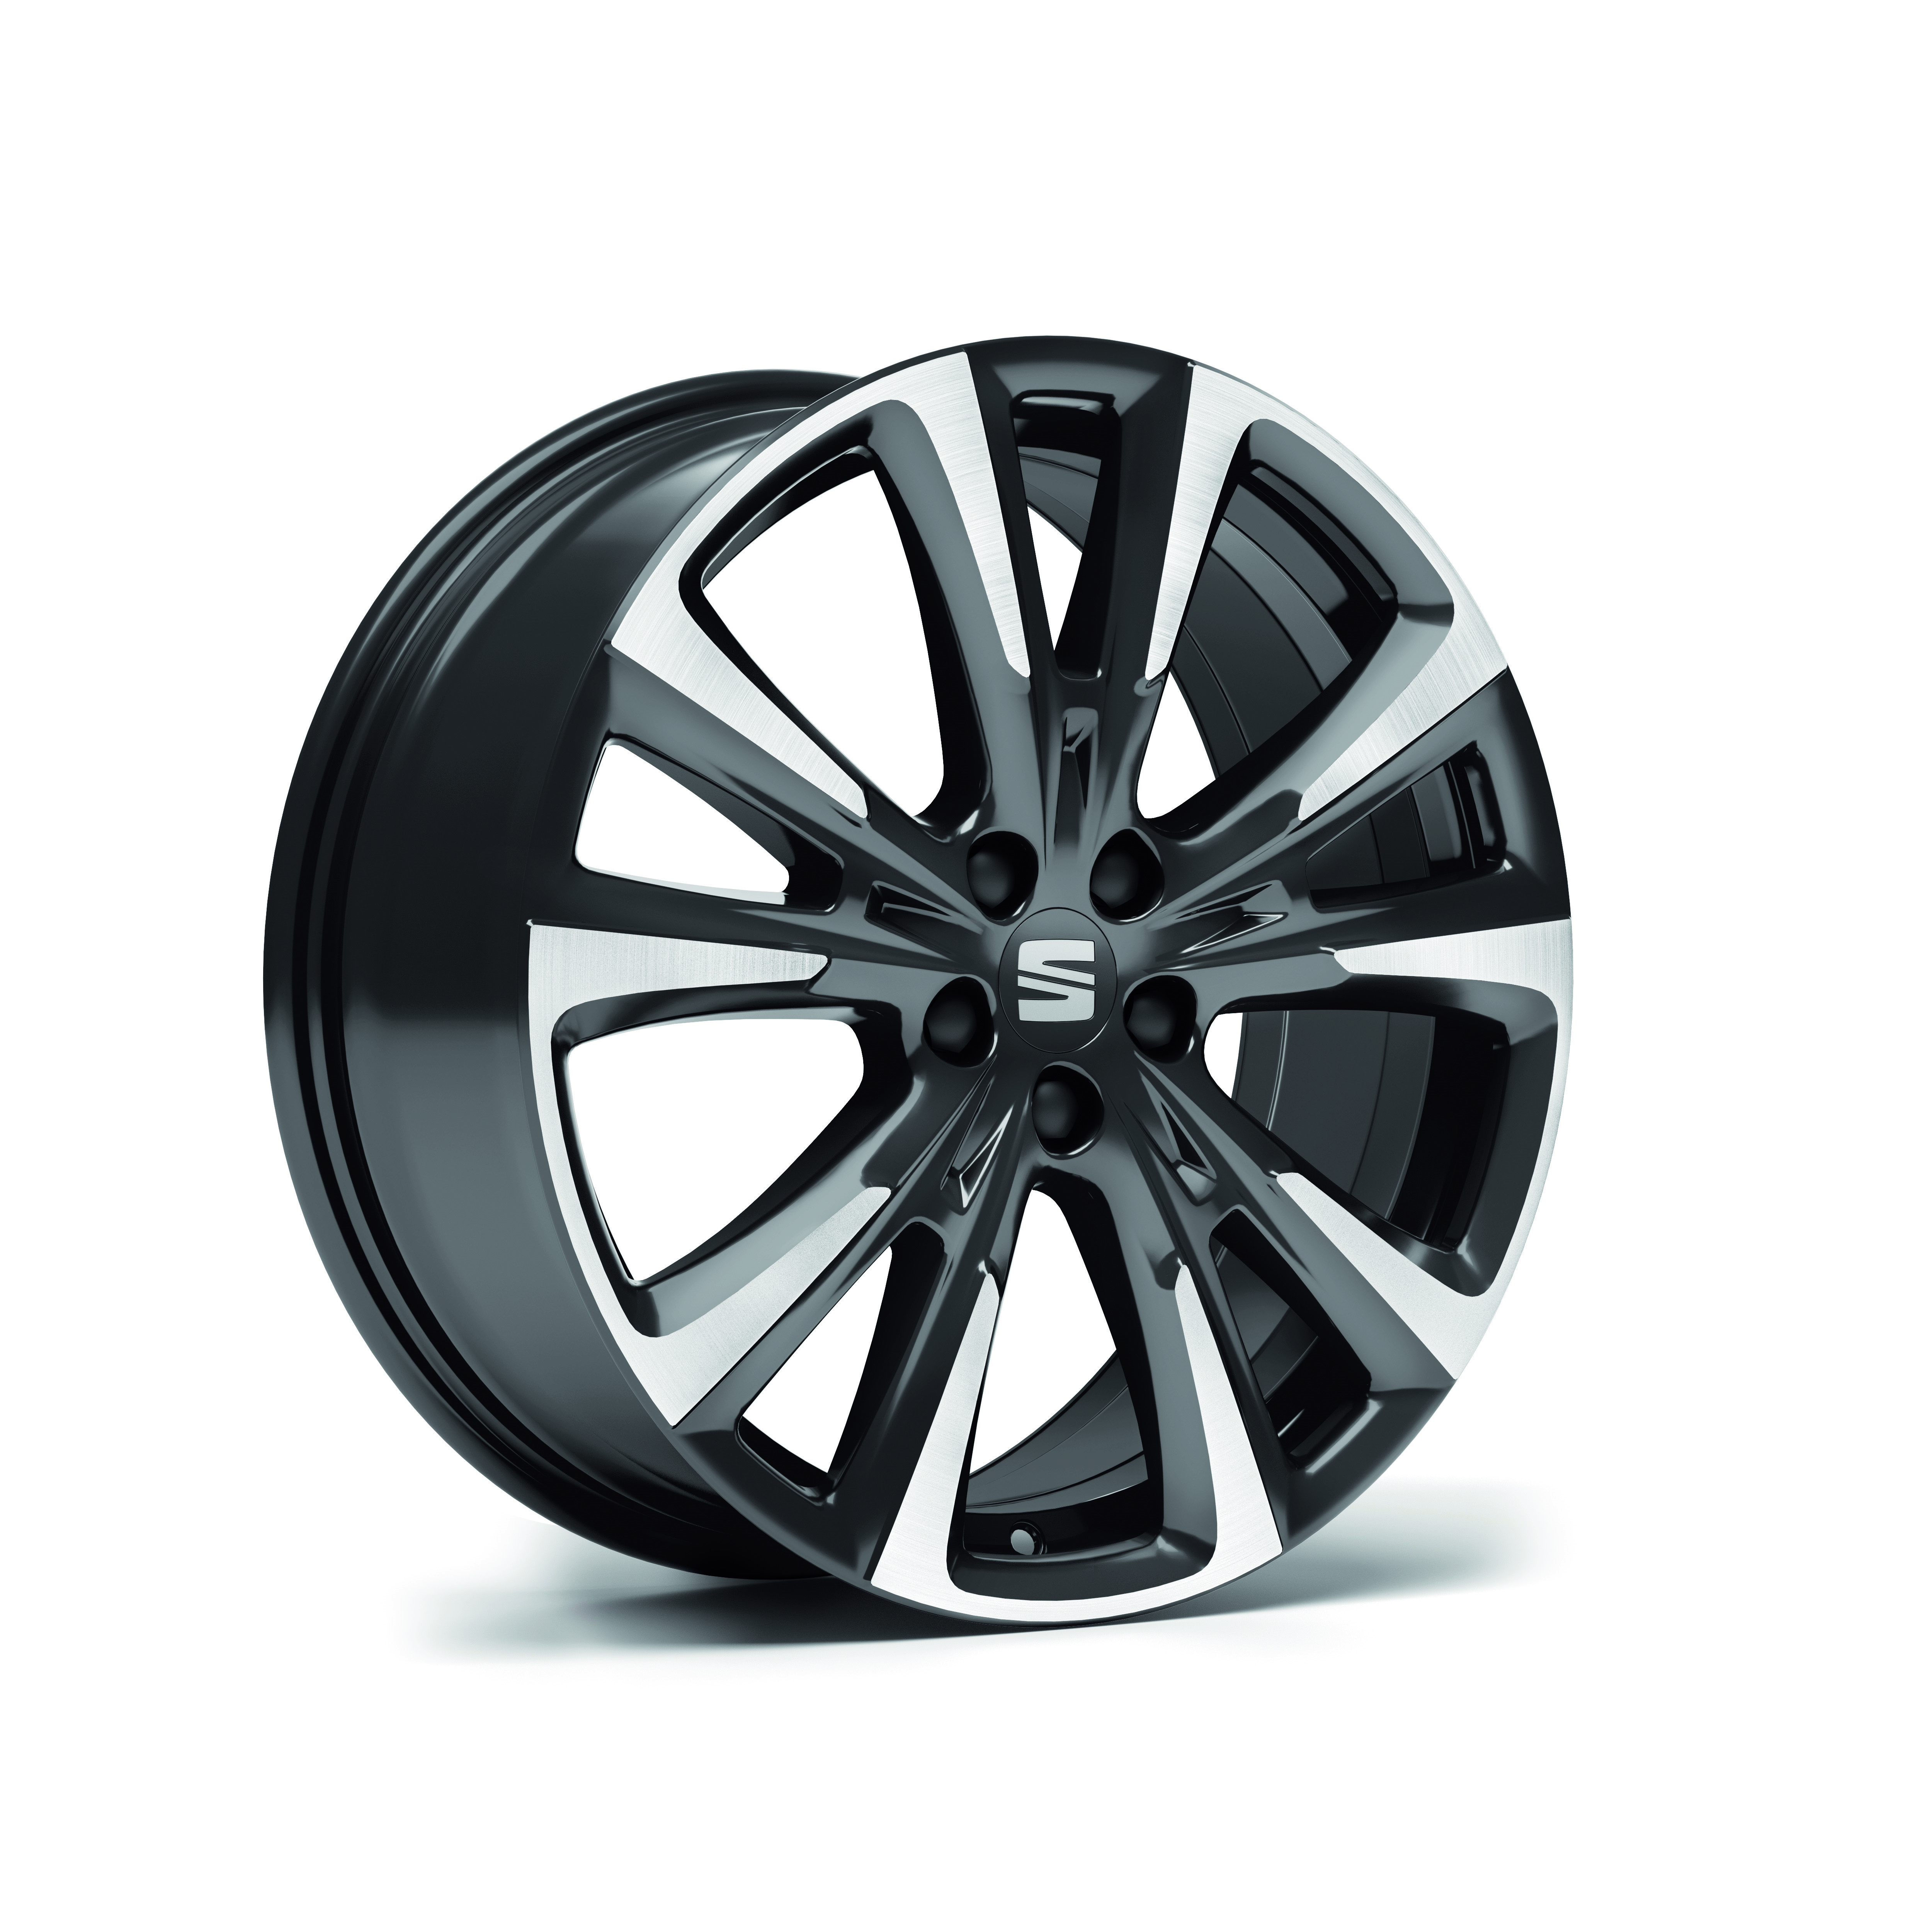 seat-arona-xperience-performance-18-inch-nuclear-grey-alloy-wheels